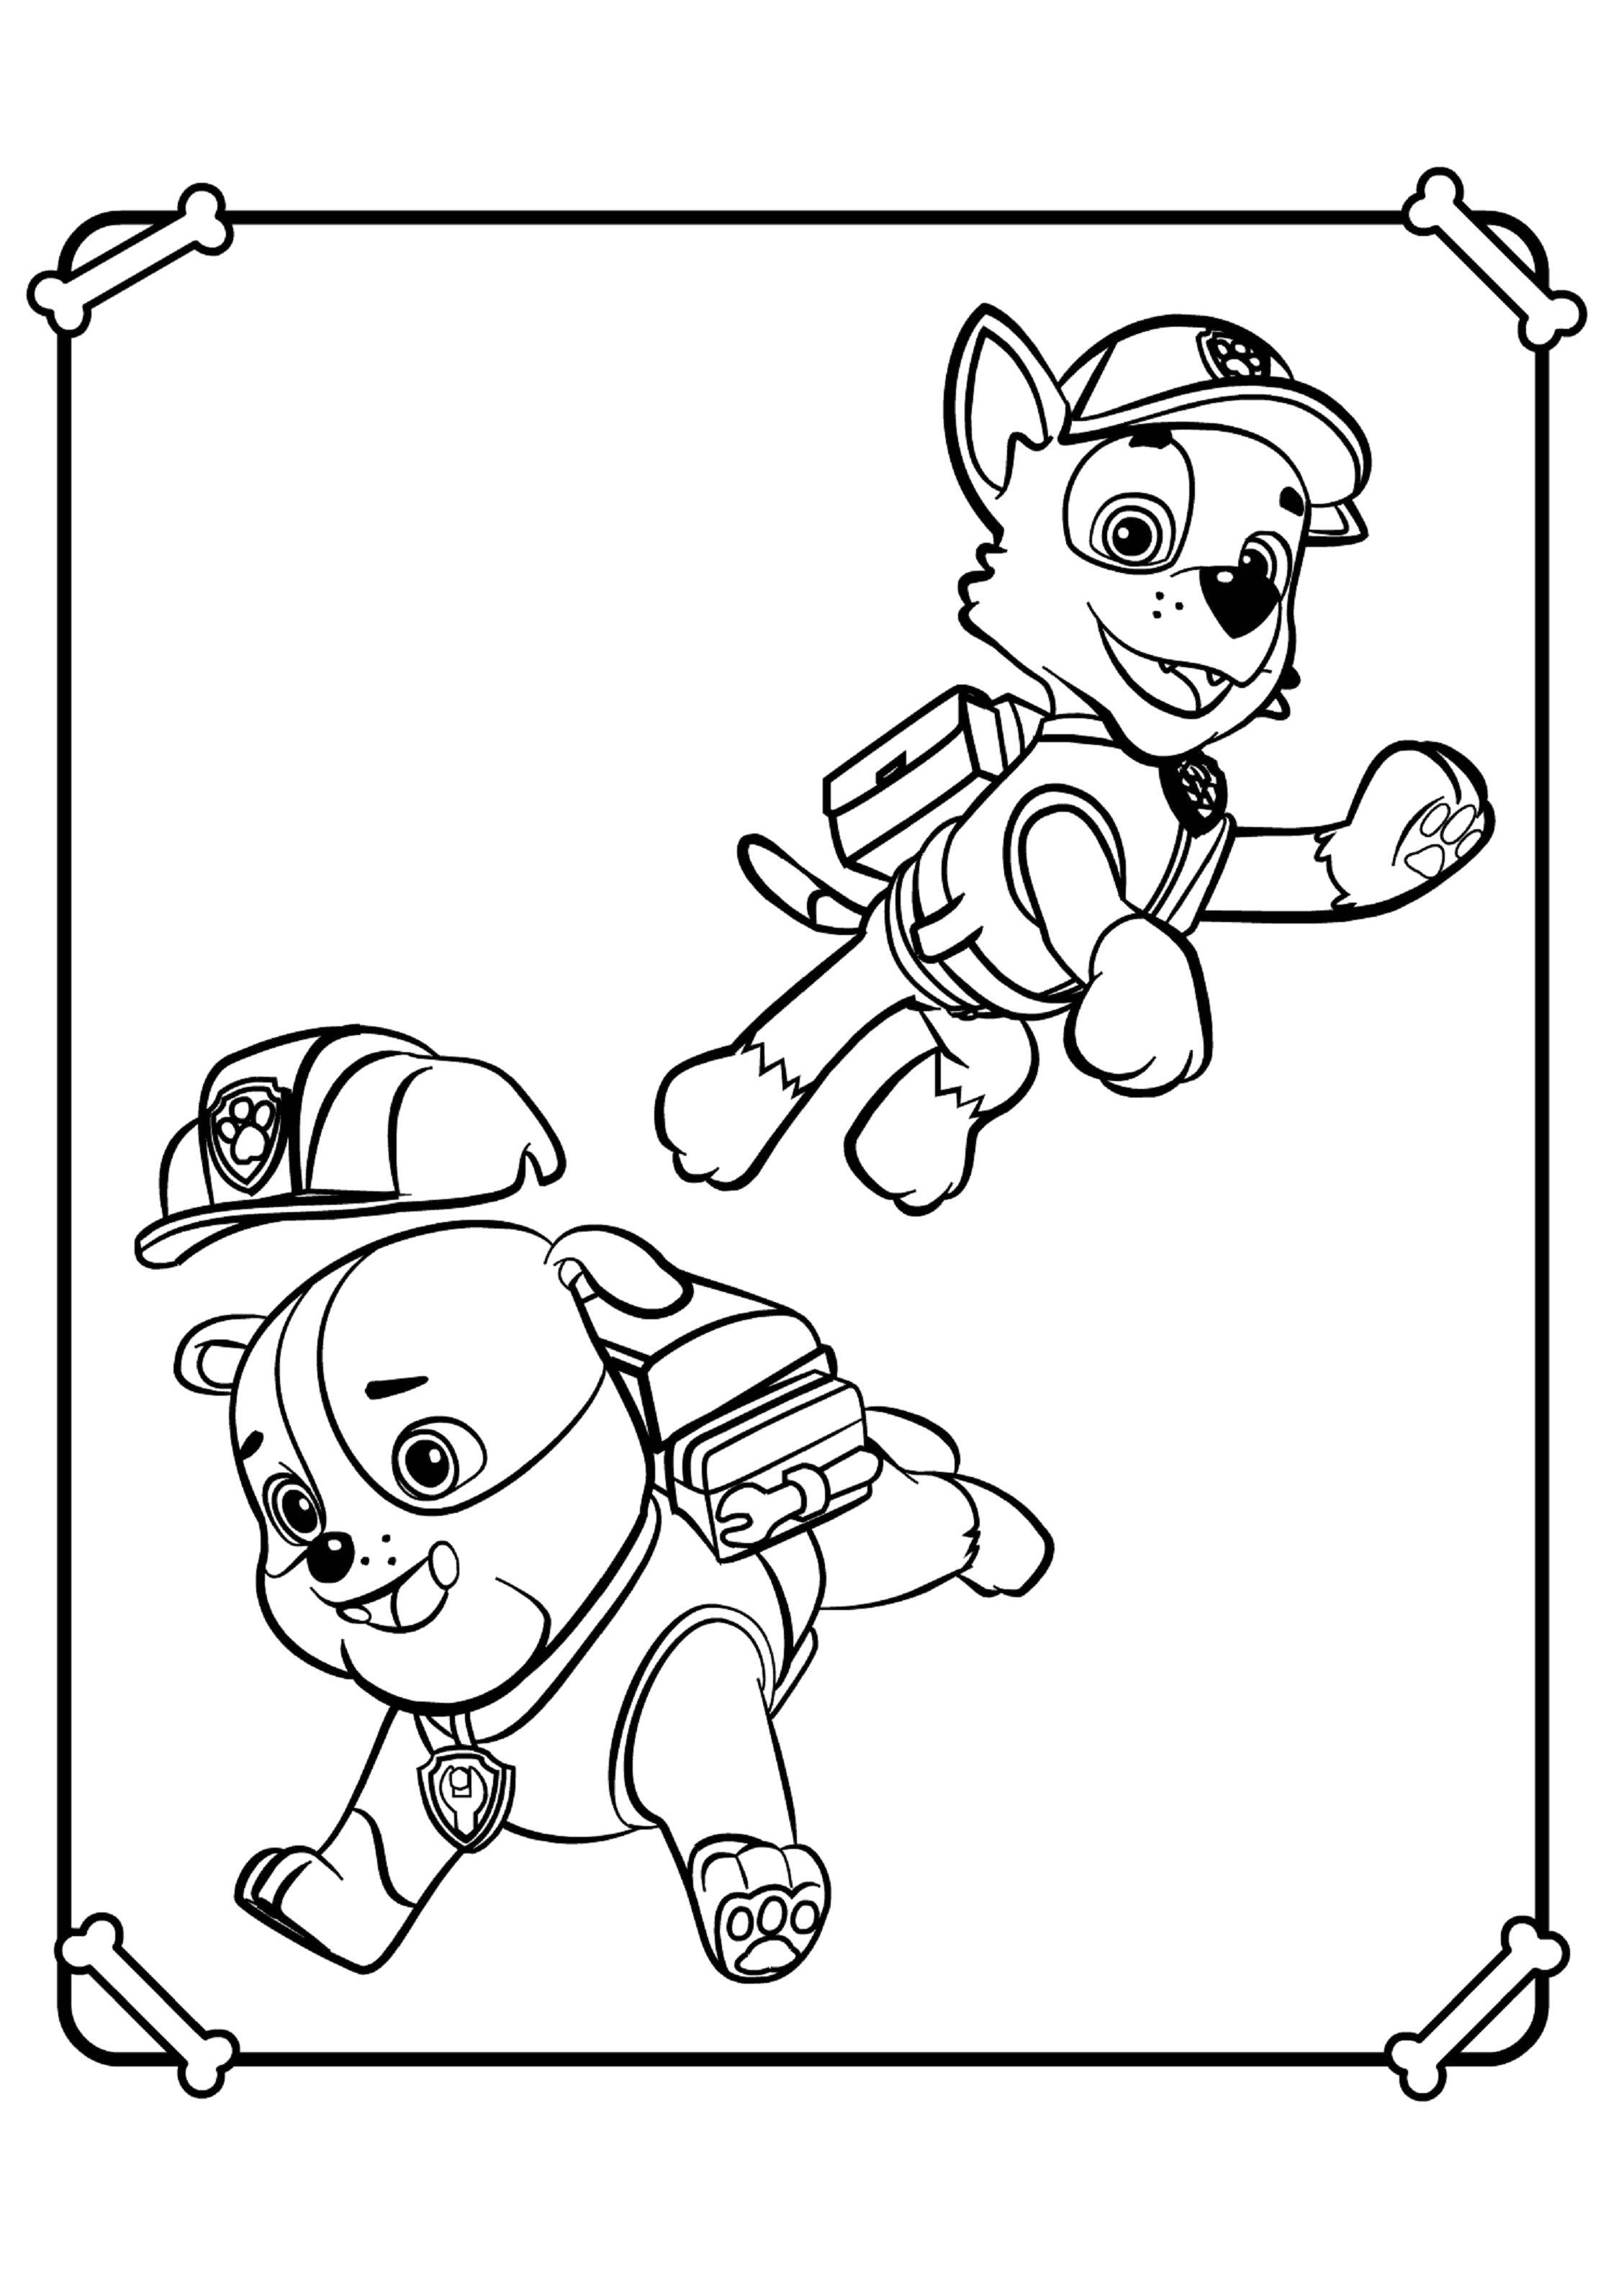 Coloring Chase and burly. Category paw patrol. Tags:  Paw patrol.